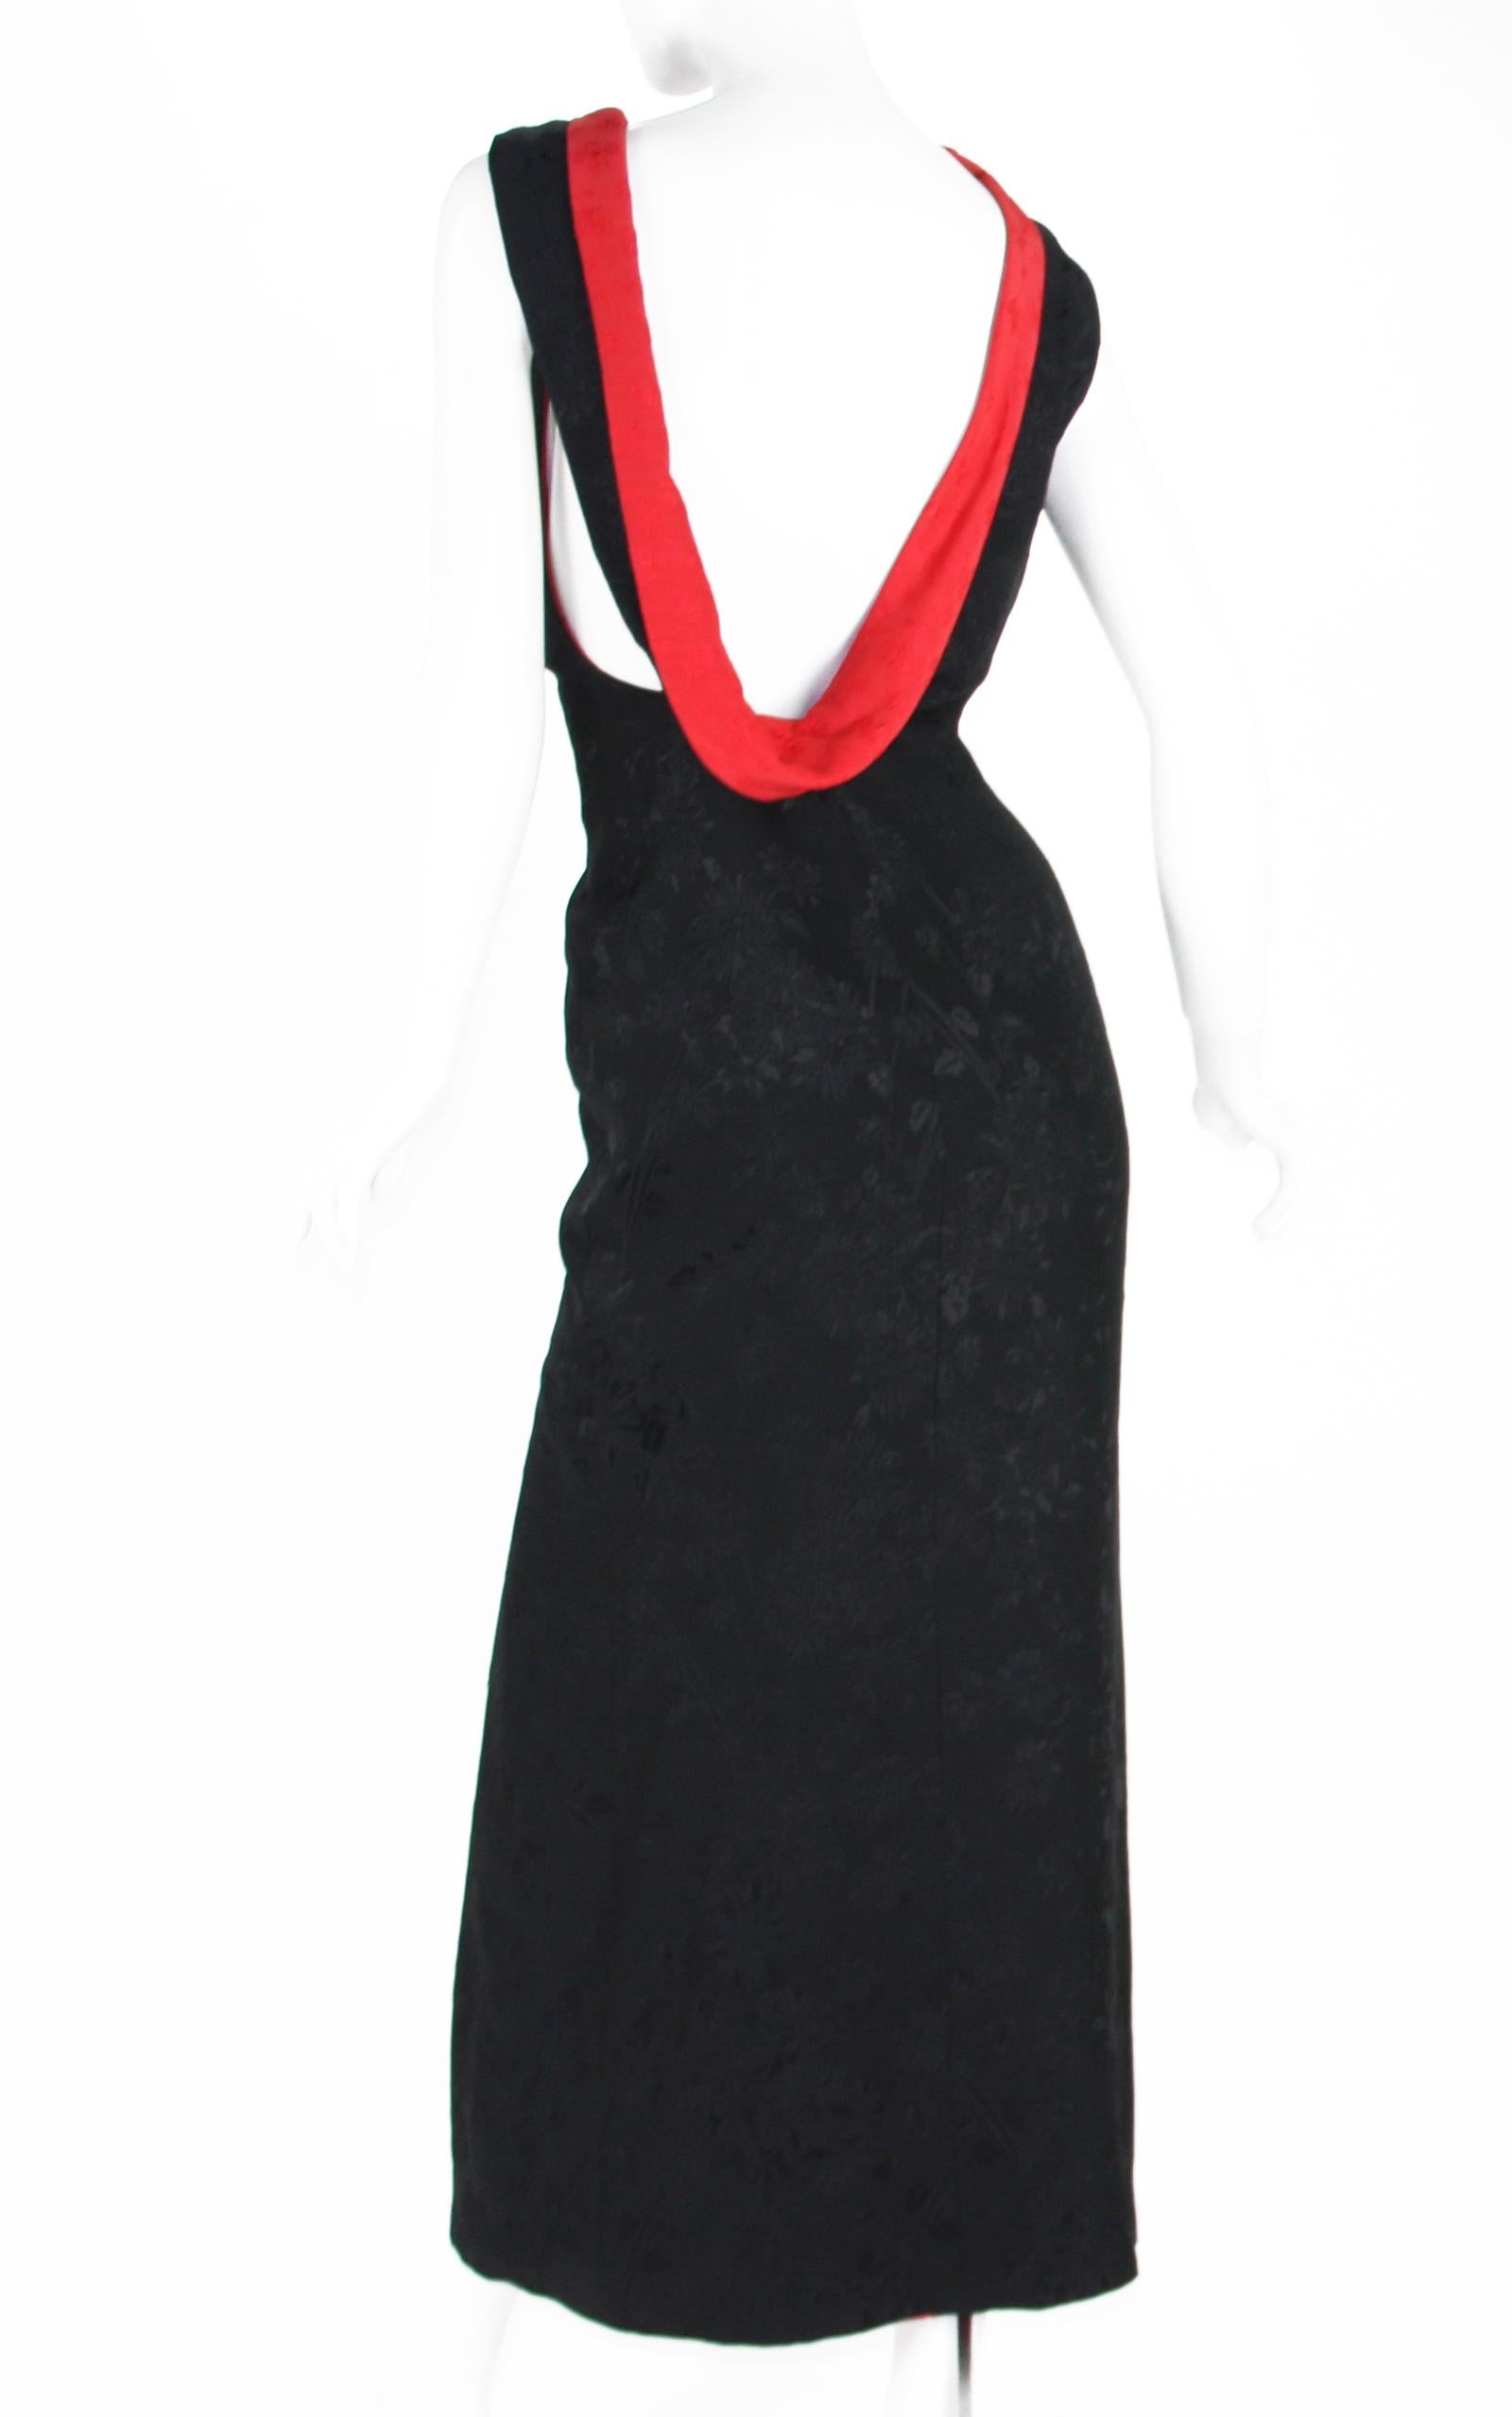 Women's Gianni Versace Couture S/S 1998 Collection Black and Red Open Back Dress Gown  For Sale